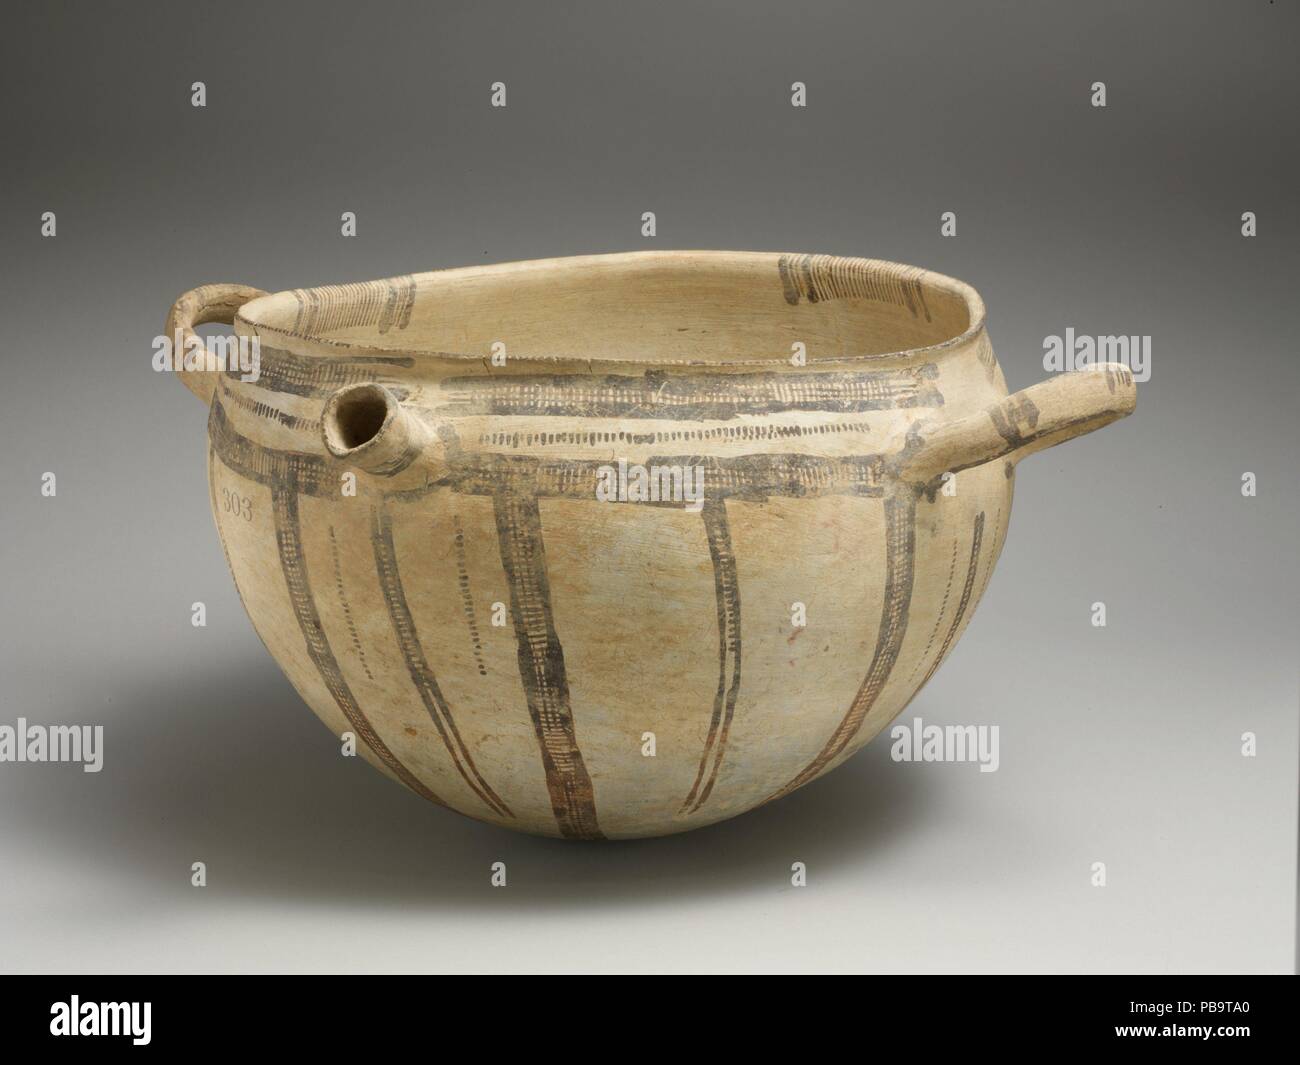 Terracotta two-handled bowl with spout. Culture: Cypriot. Dimensions: H. 8 in. (20.3 cm); diameter  11 in. (28 cm). Date: ca. 1600-1150 B.C..  Lateral handles and tubular spout, lattice ornament. Museum: Metropolitan Museum of Art, New York, USA. Stock Photo